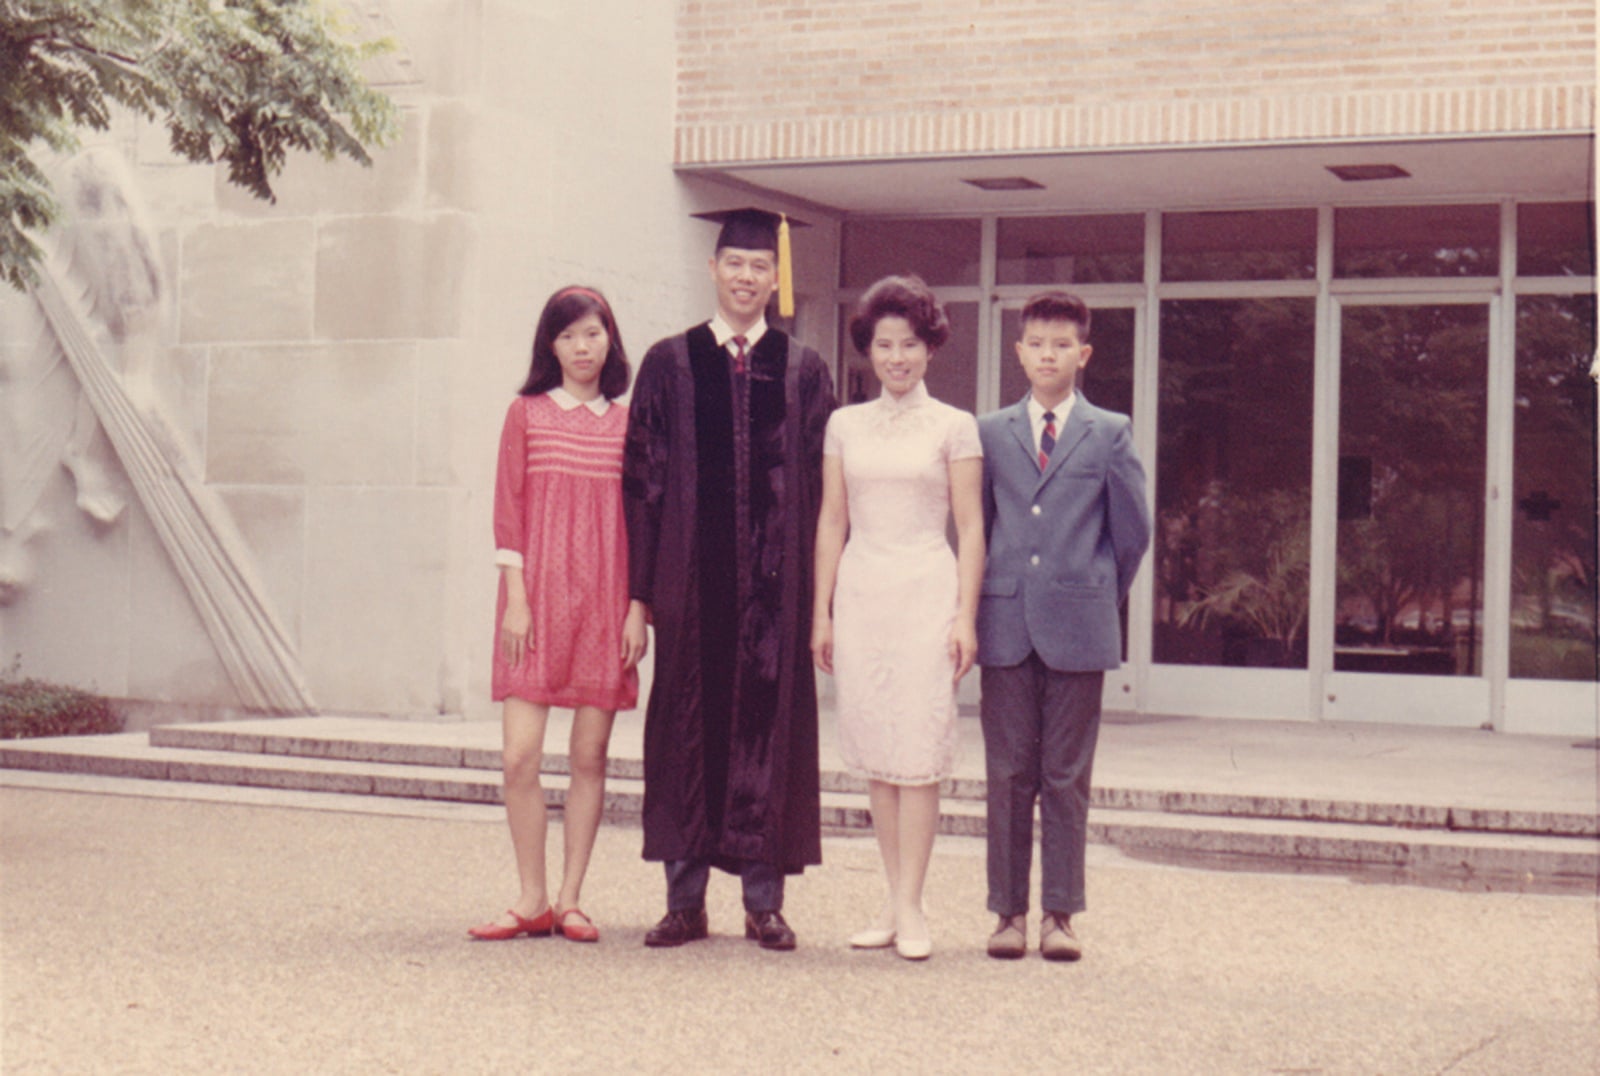 Poh-Hsi Pan with family at Rice in 1966